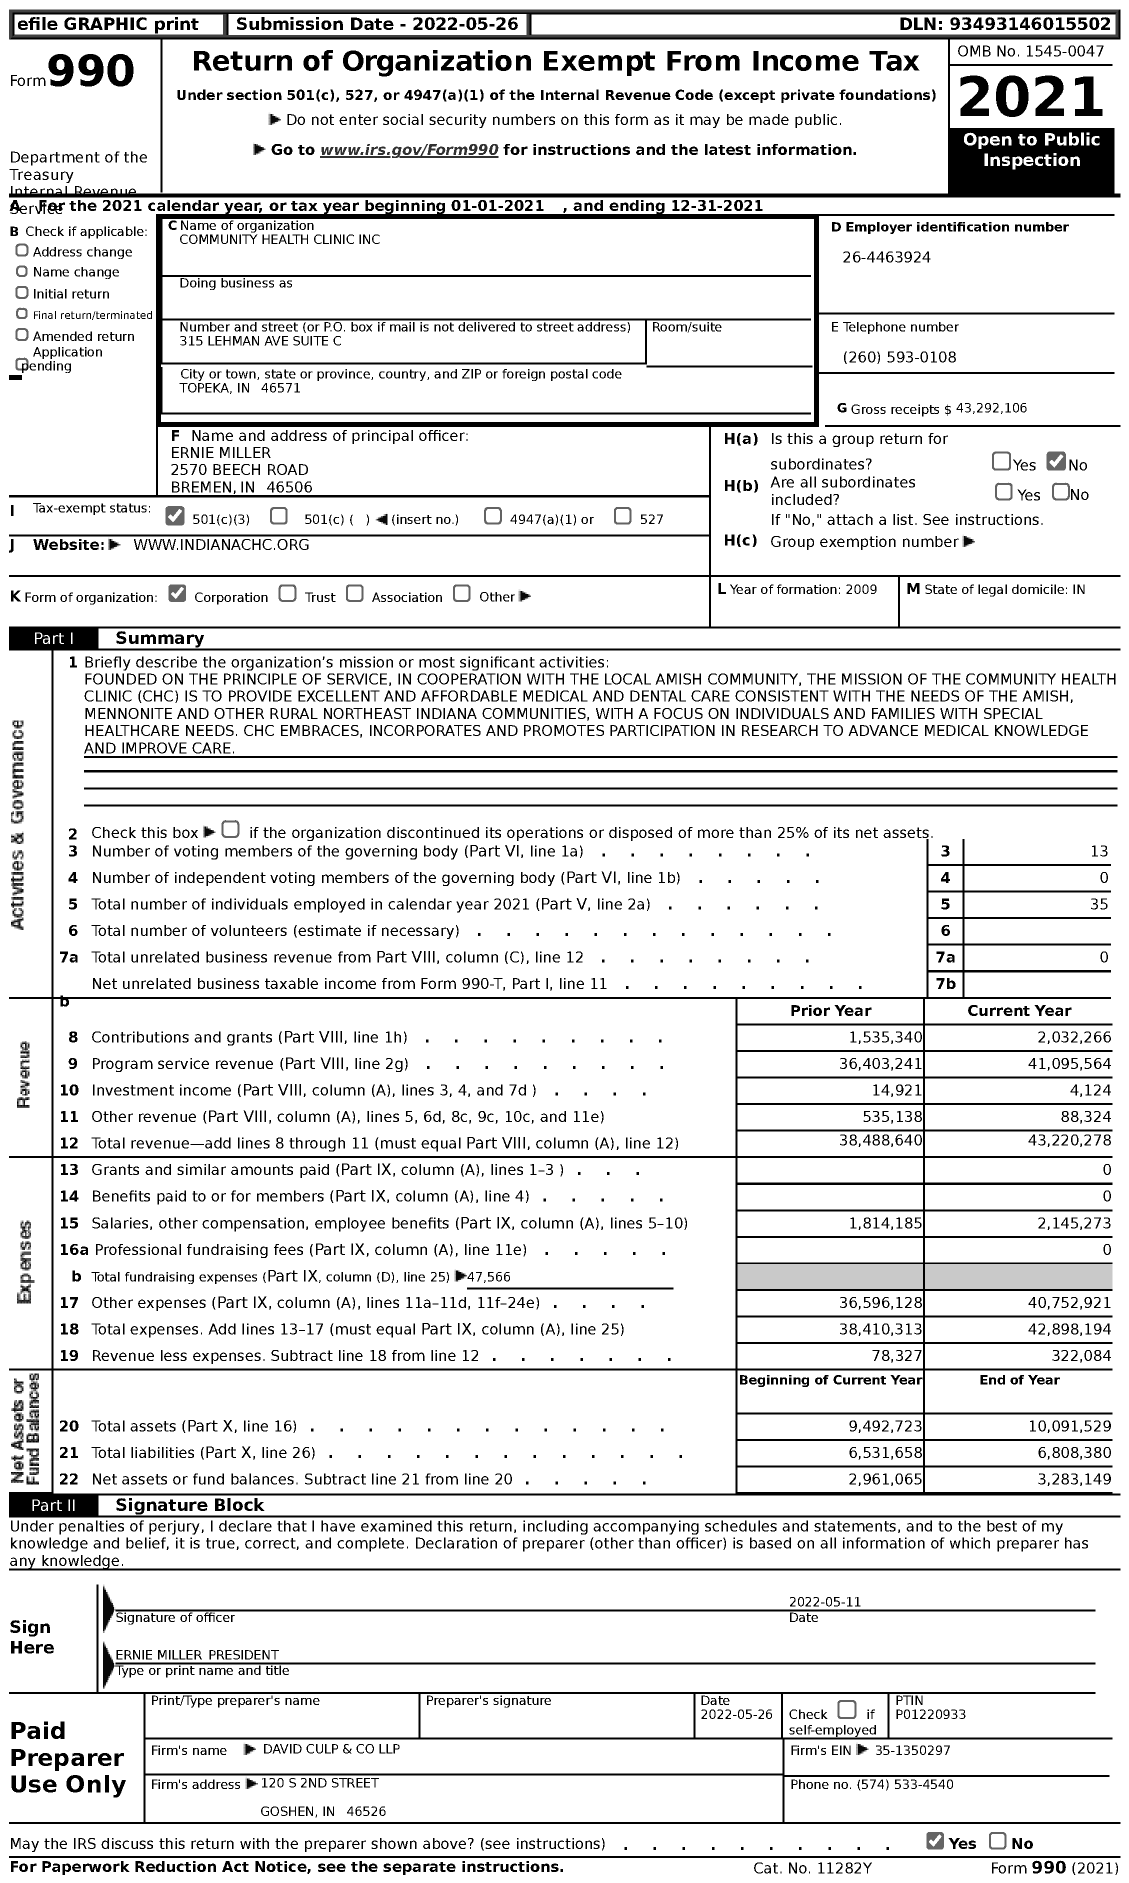 Image of first page of 2021 Form 990 for Community Health Clinic (CHC)